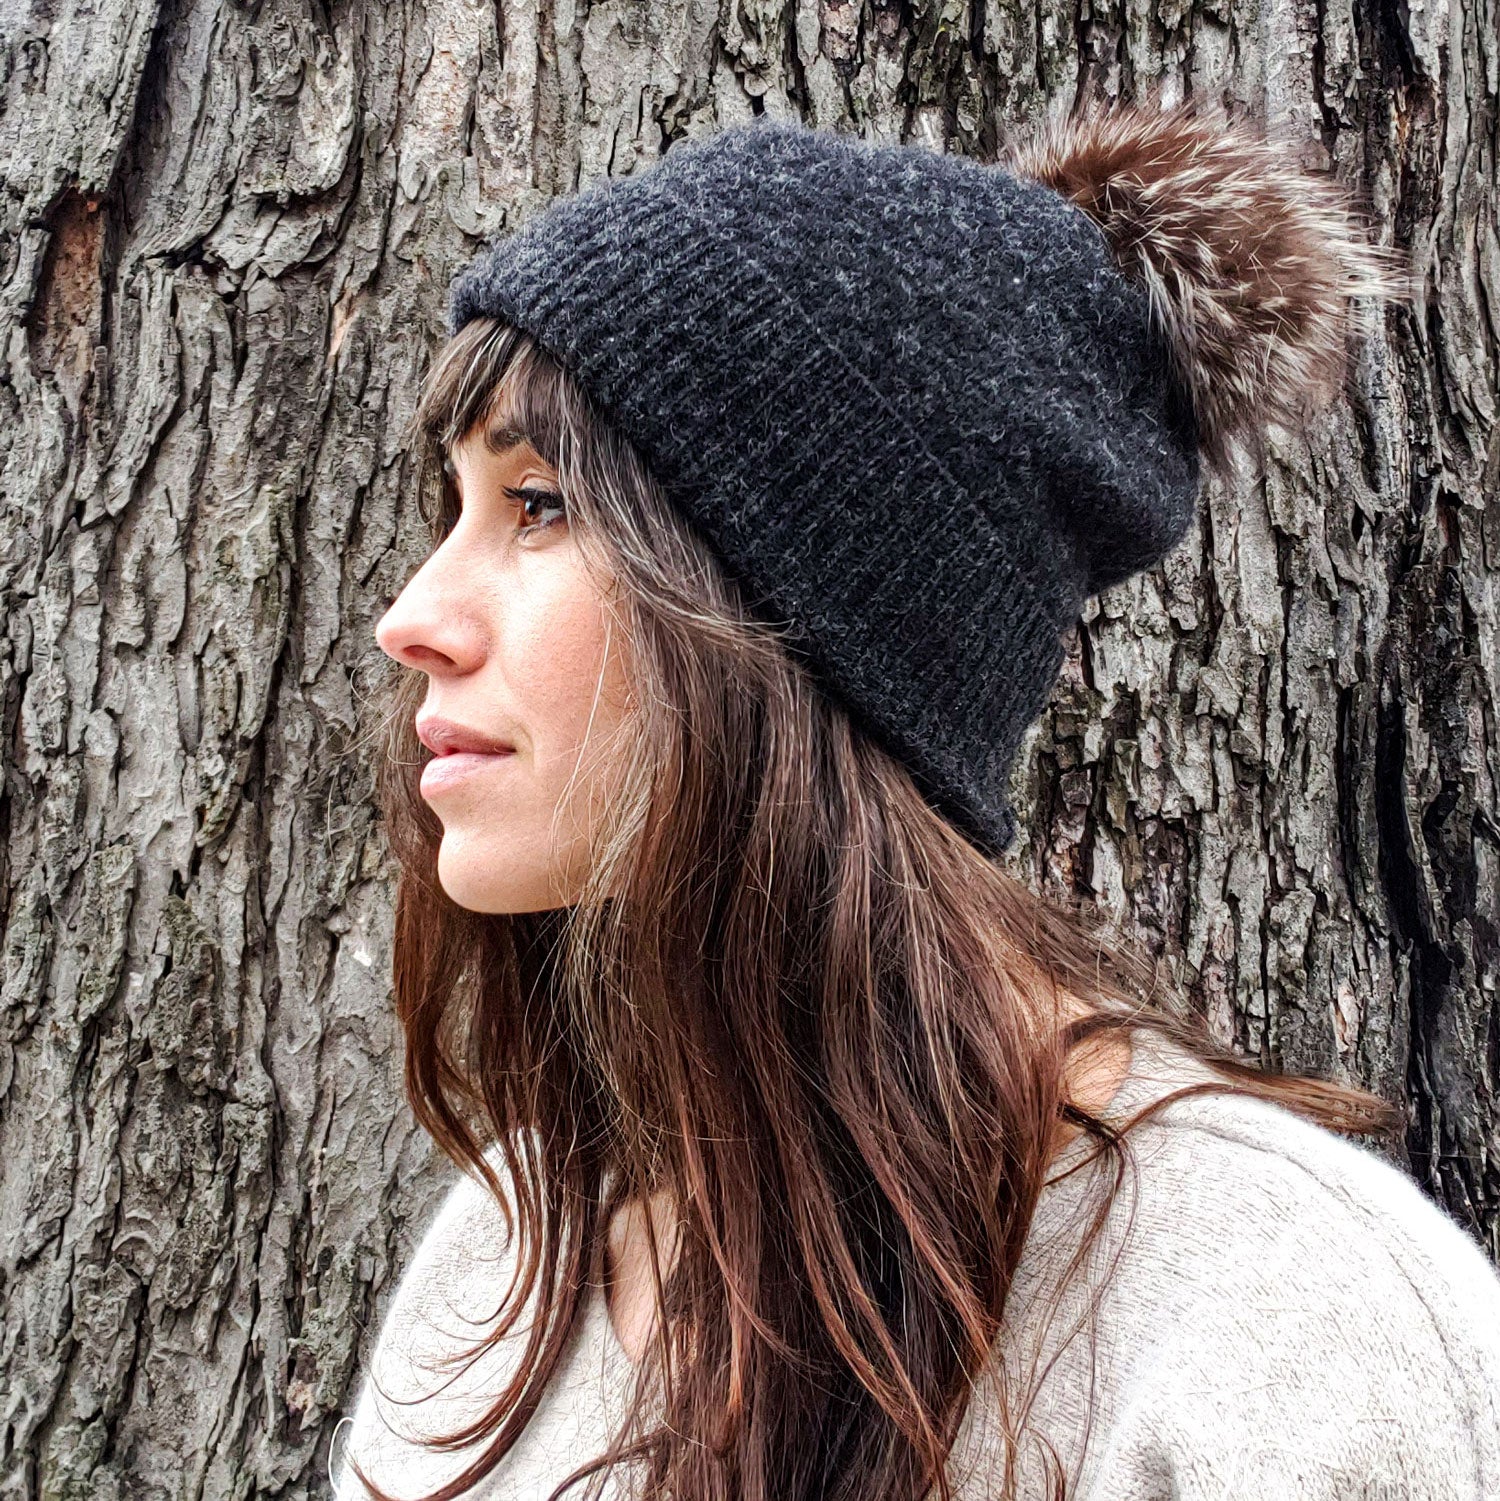 Introducing the Atlas Tuque Pattern